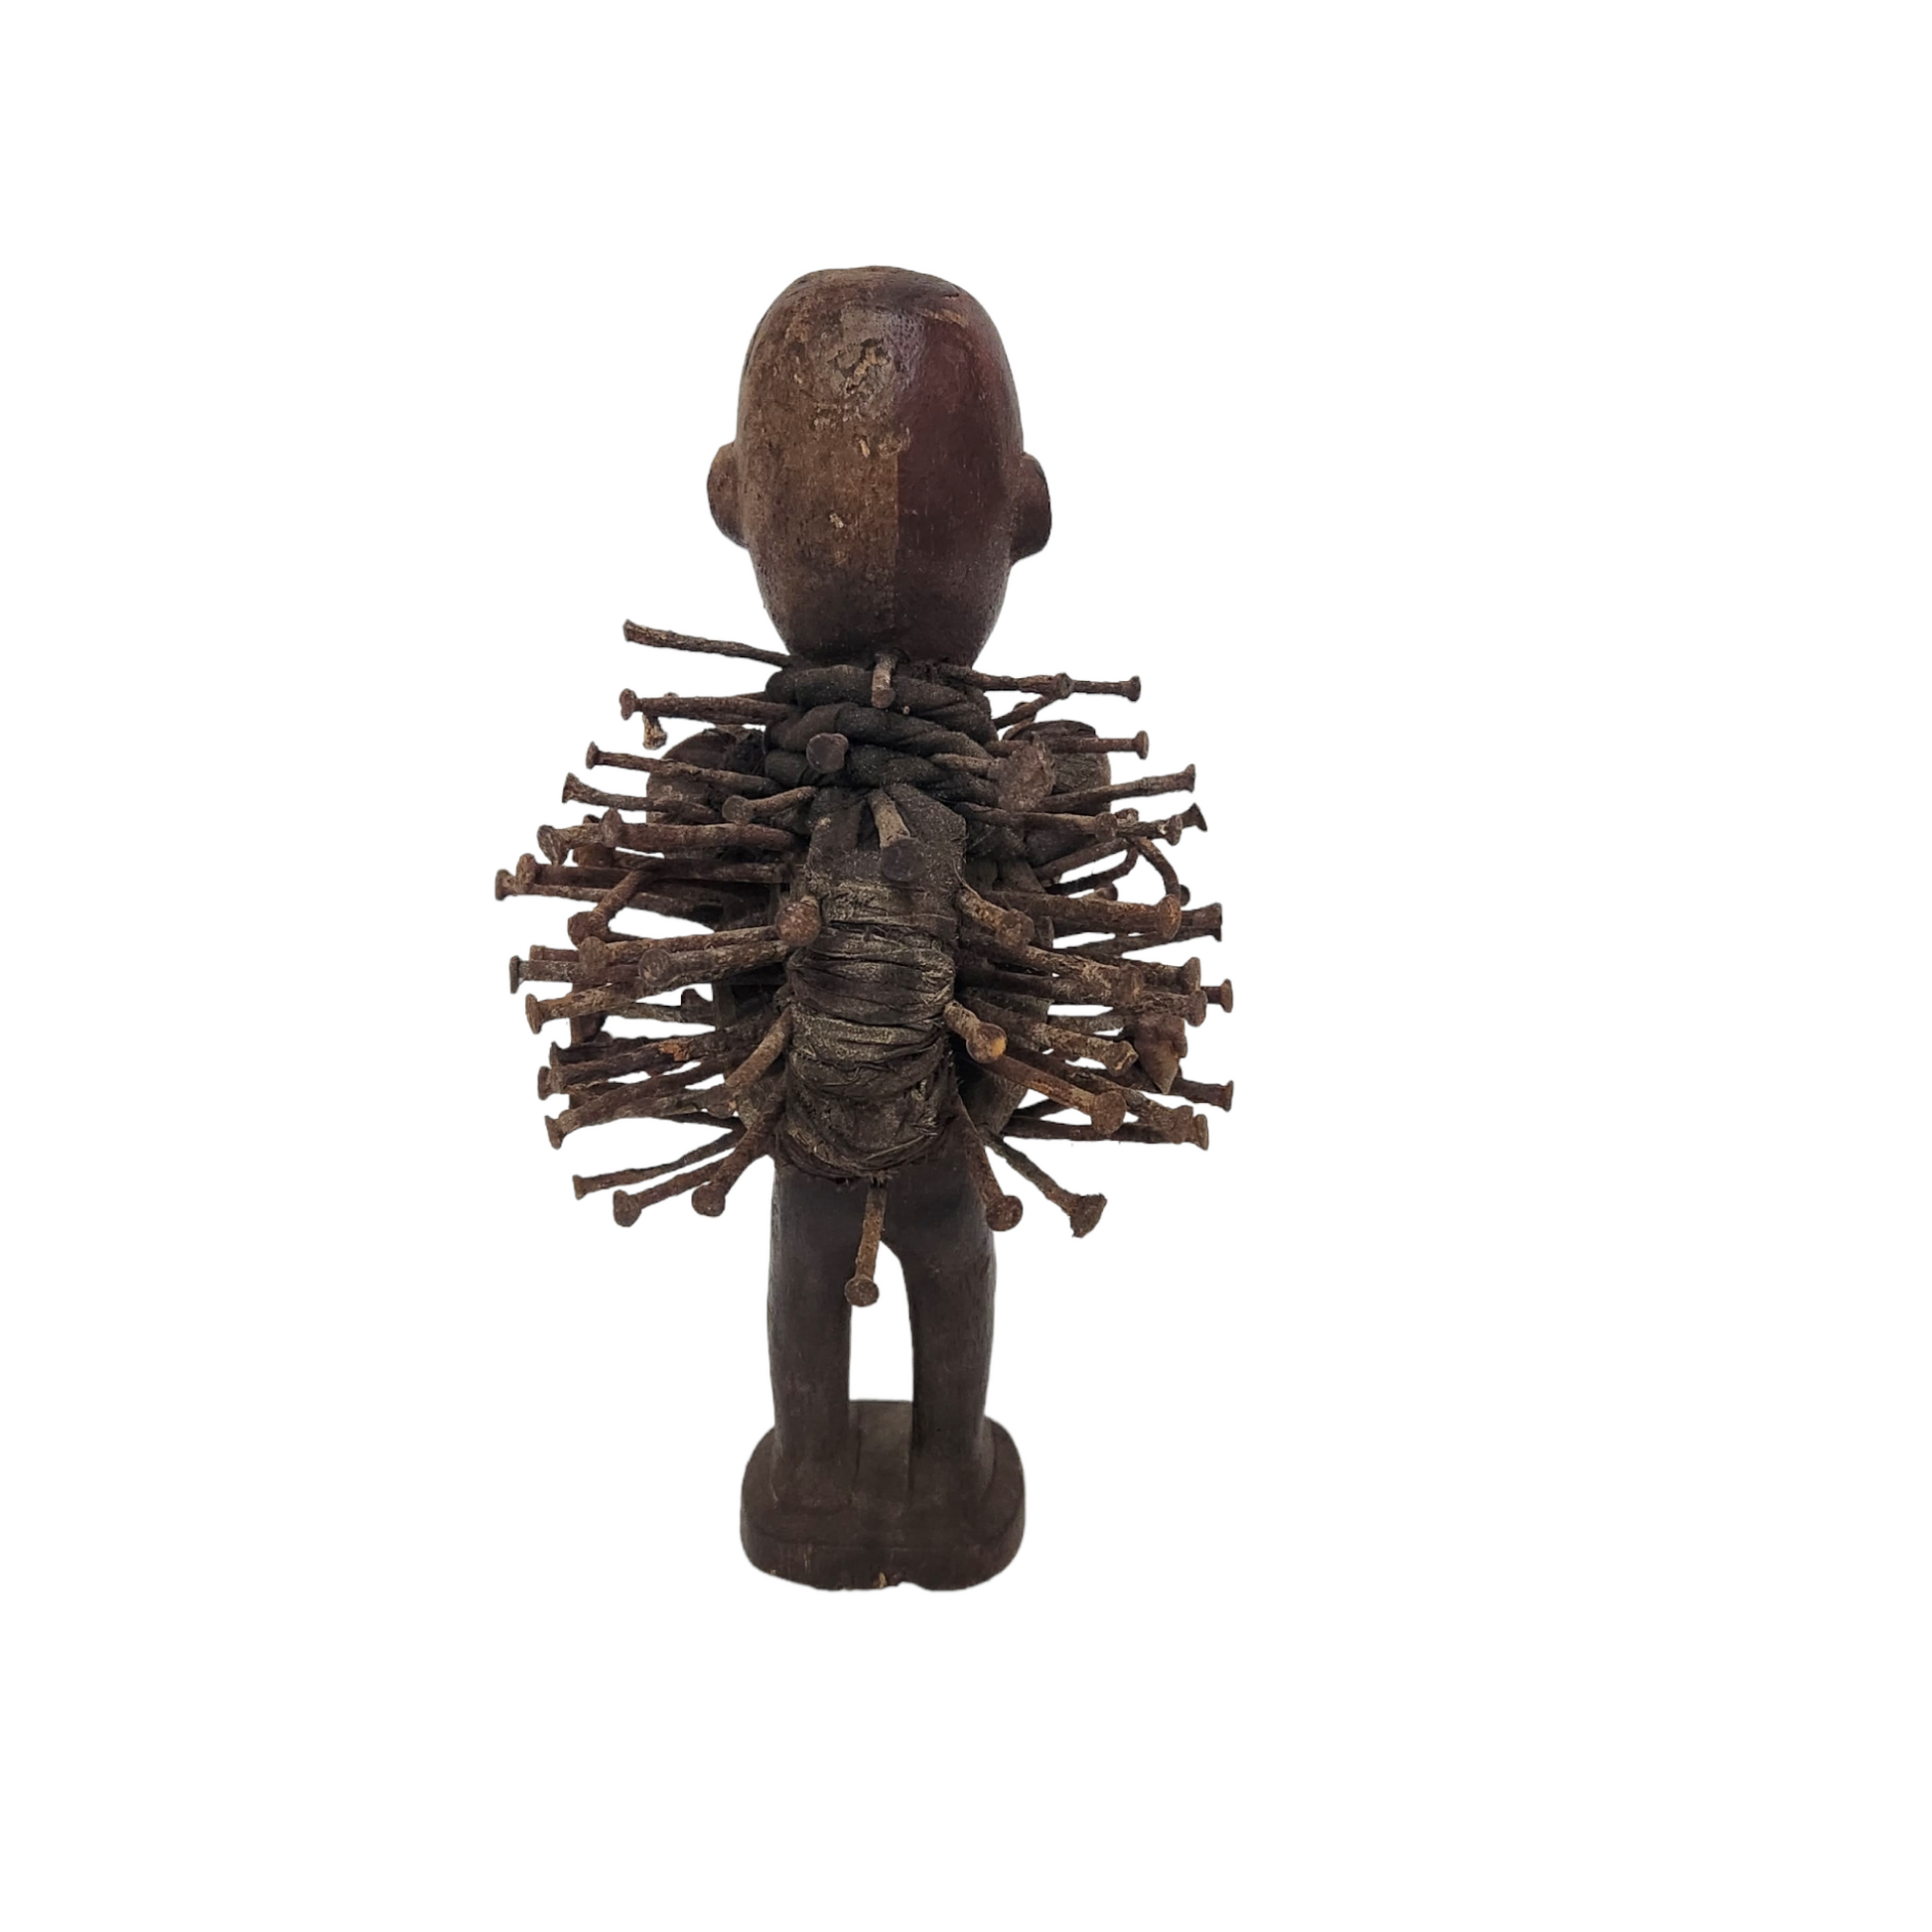 Bacongo Nails fetish from Zaire ( 20th Century) - MD African Art